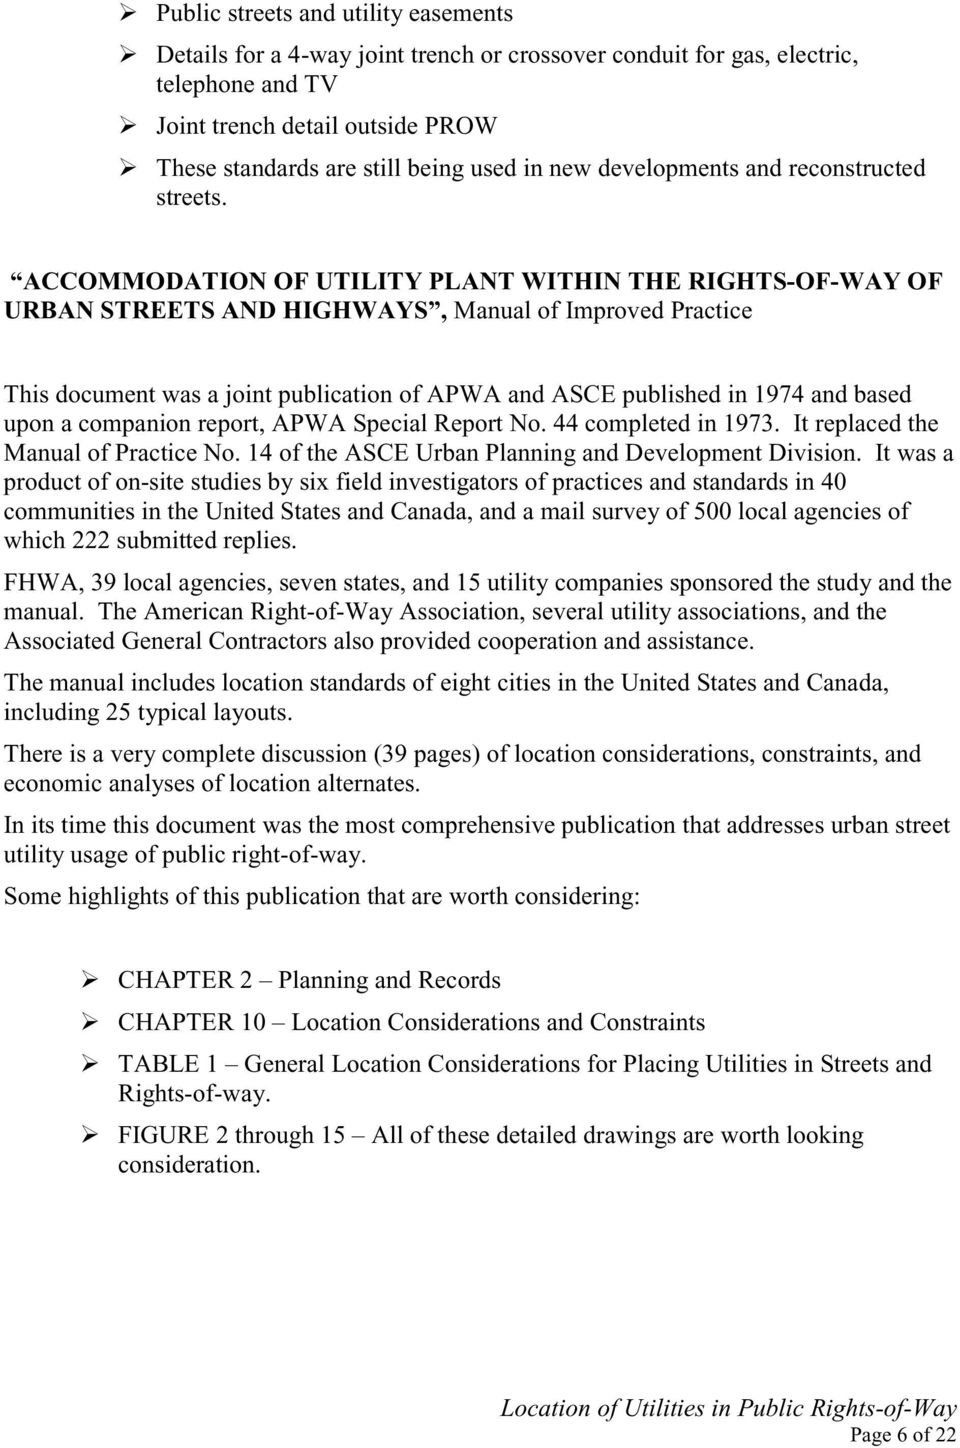 ACCOMMODATION OF UTILITY PLANT WITHIN THE RIGHTS-OF-WAY OF URBAN STREETS AND HIGHWAYS, Manual of Improved Practice This document was a joint publication of APWA and ASCE published in 1974 and based